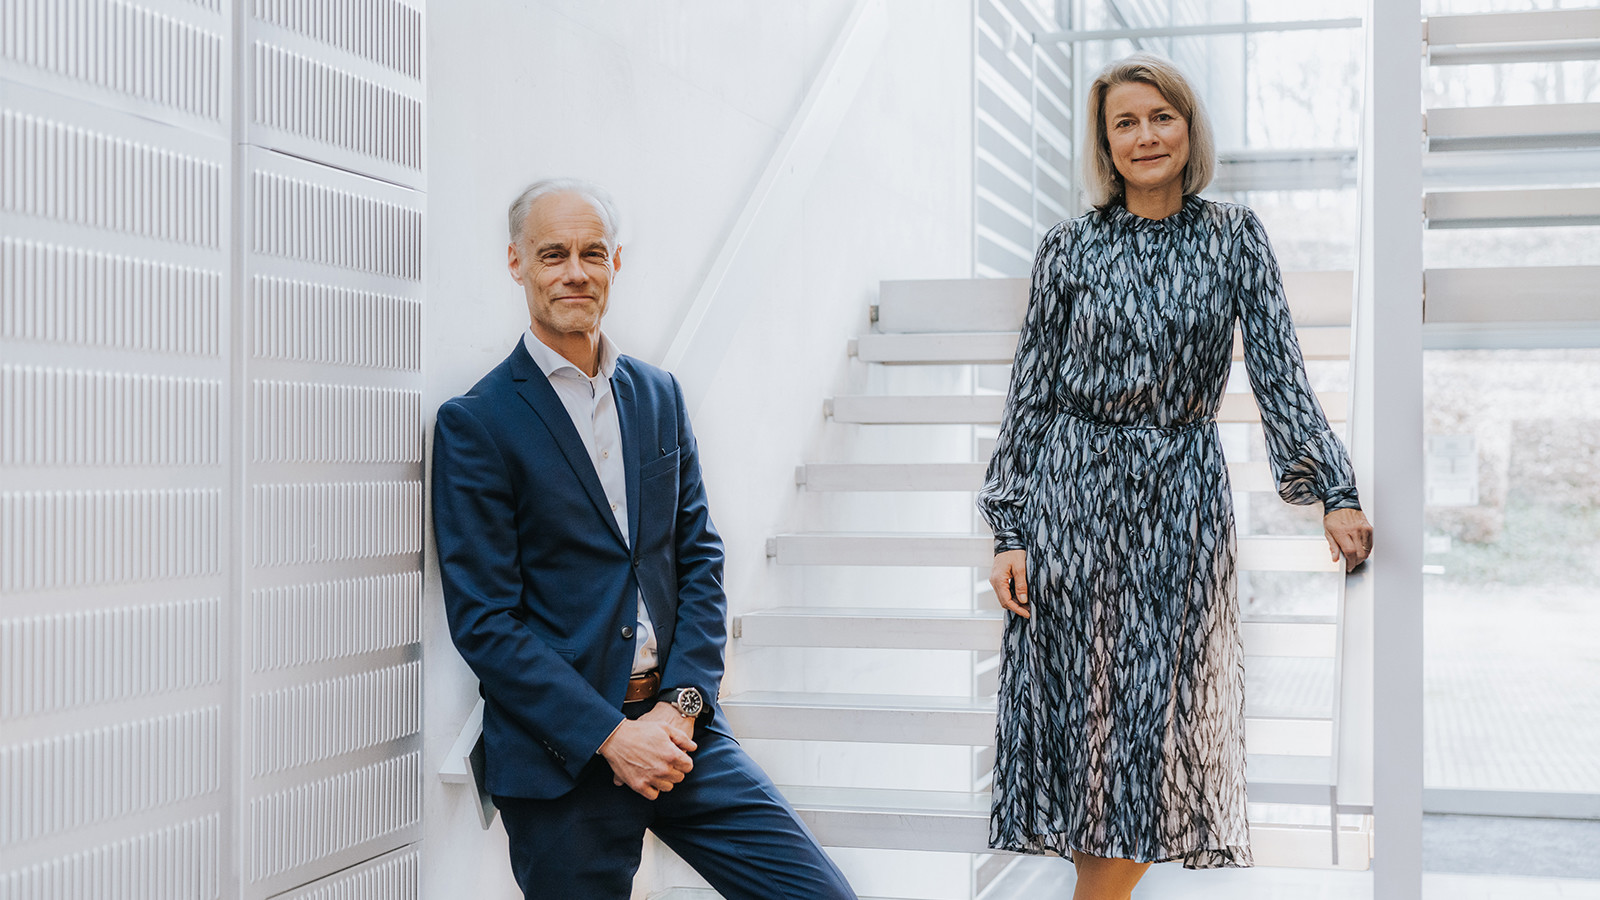 Eva Berneke leaves KMD and Per Johansson takes over as CEO